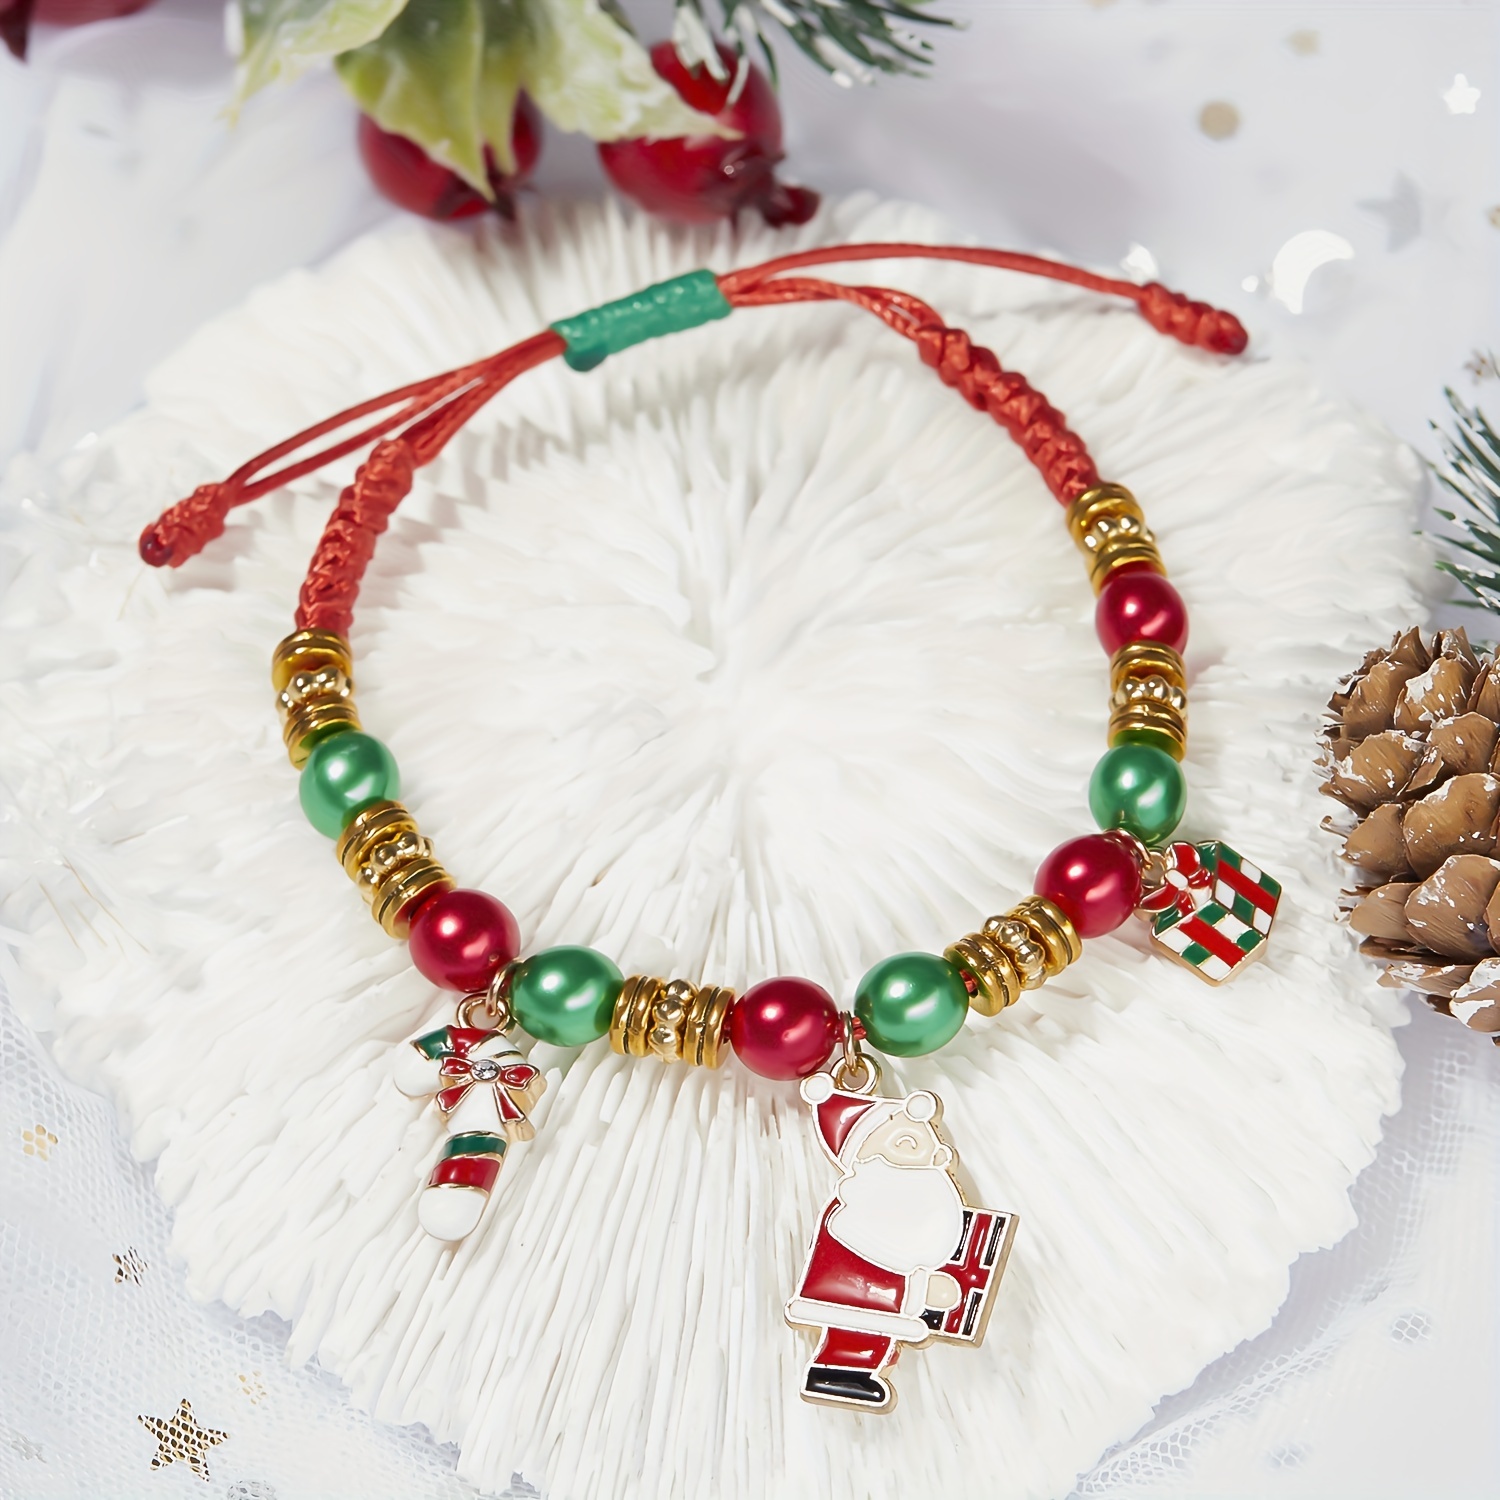 NVENF 2300PCS+ Christmas Beads Charms for Jewelry Making, Enamel Wreath Elk  Snowman Snowflake Charms, Red Green Christmas Clay Beads, Assorted